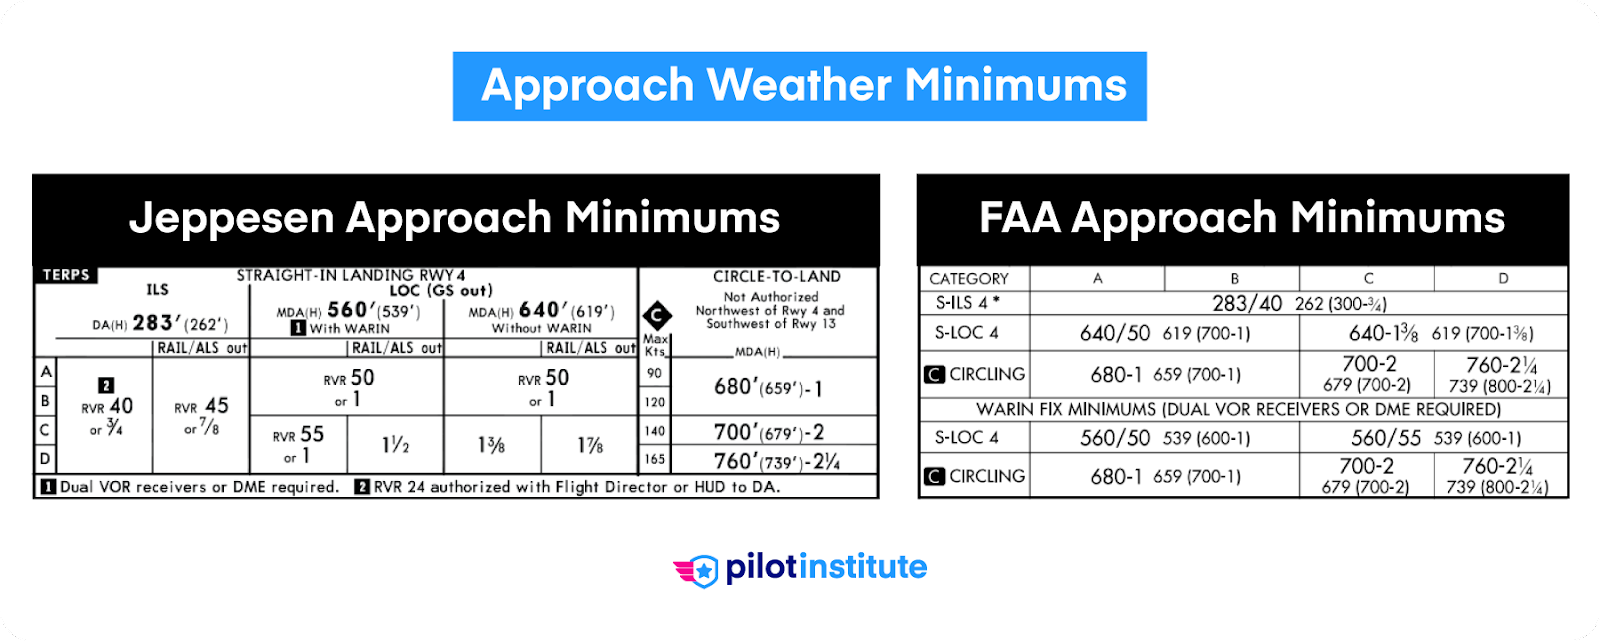 Approach weather minimums section for FAA and Jeppesen charts.